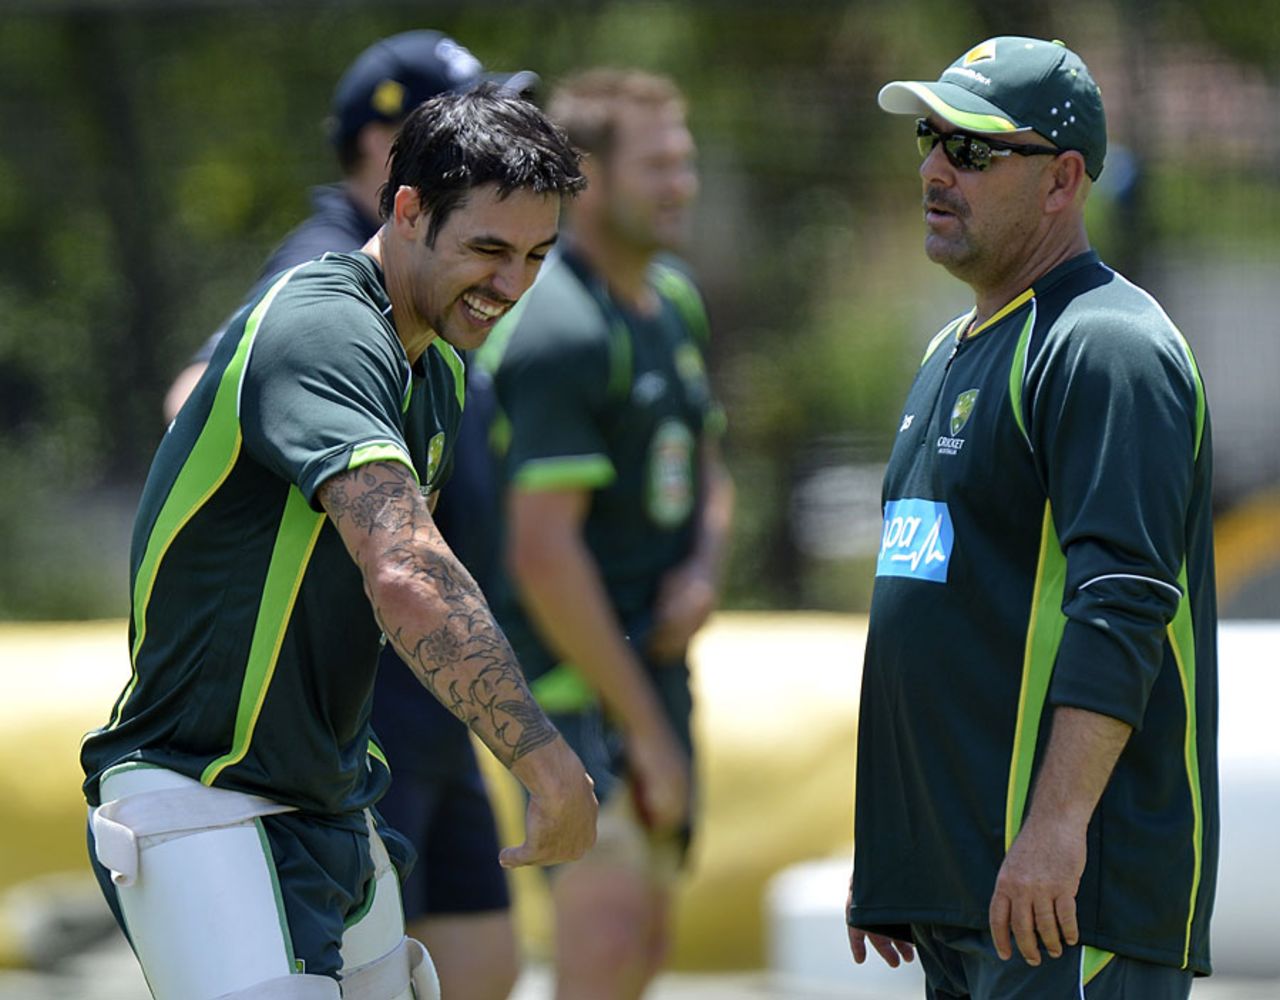 Darren Lehmann, sporting some extra facial hair, chats with Mitchell Johnson, Brisbane, November 15, 2013